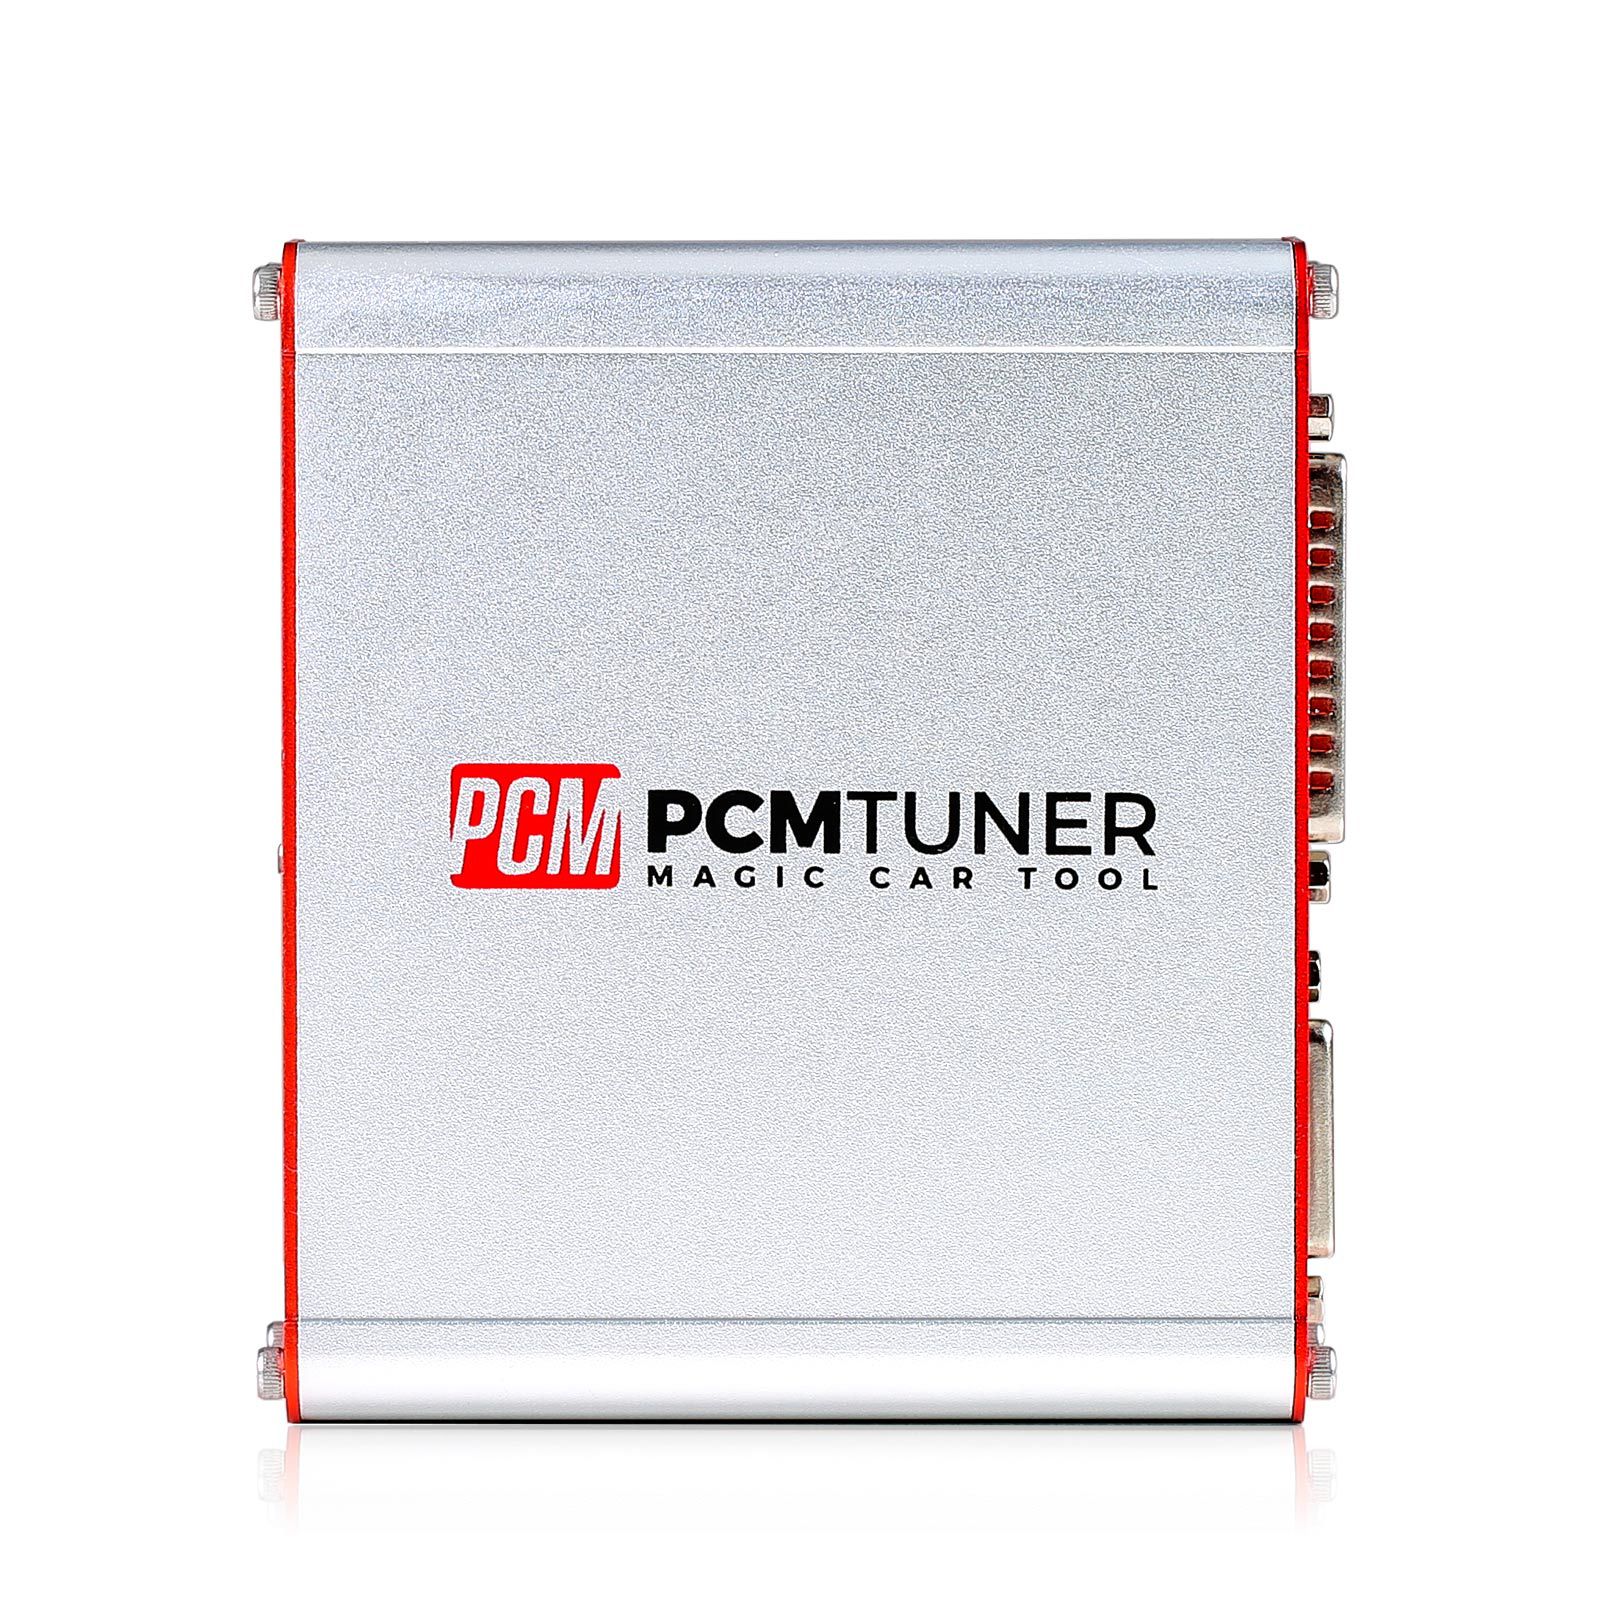 2022 Newest V1.27 PCMtuner ECU Programmer with 67 Modules Free Update Online Support Checksum and Pinout Diagram with Free Damaos